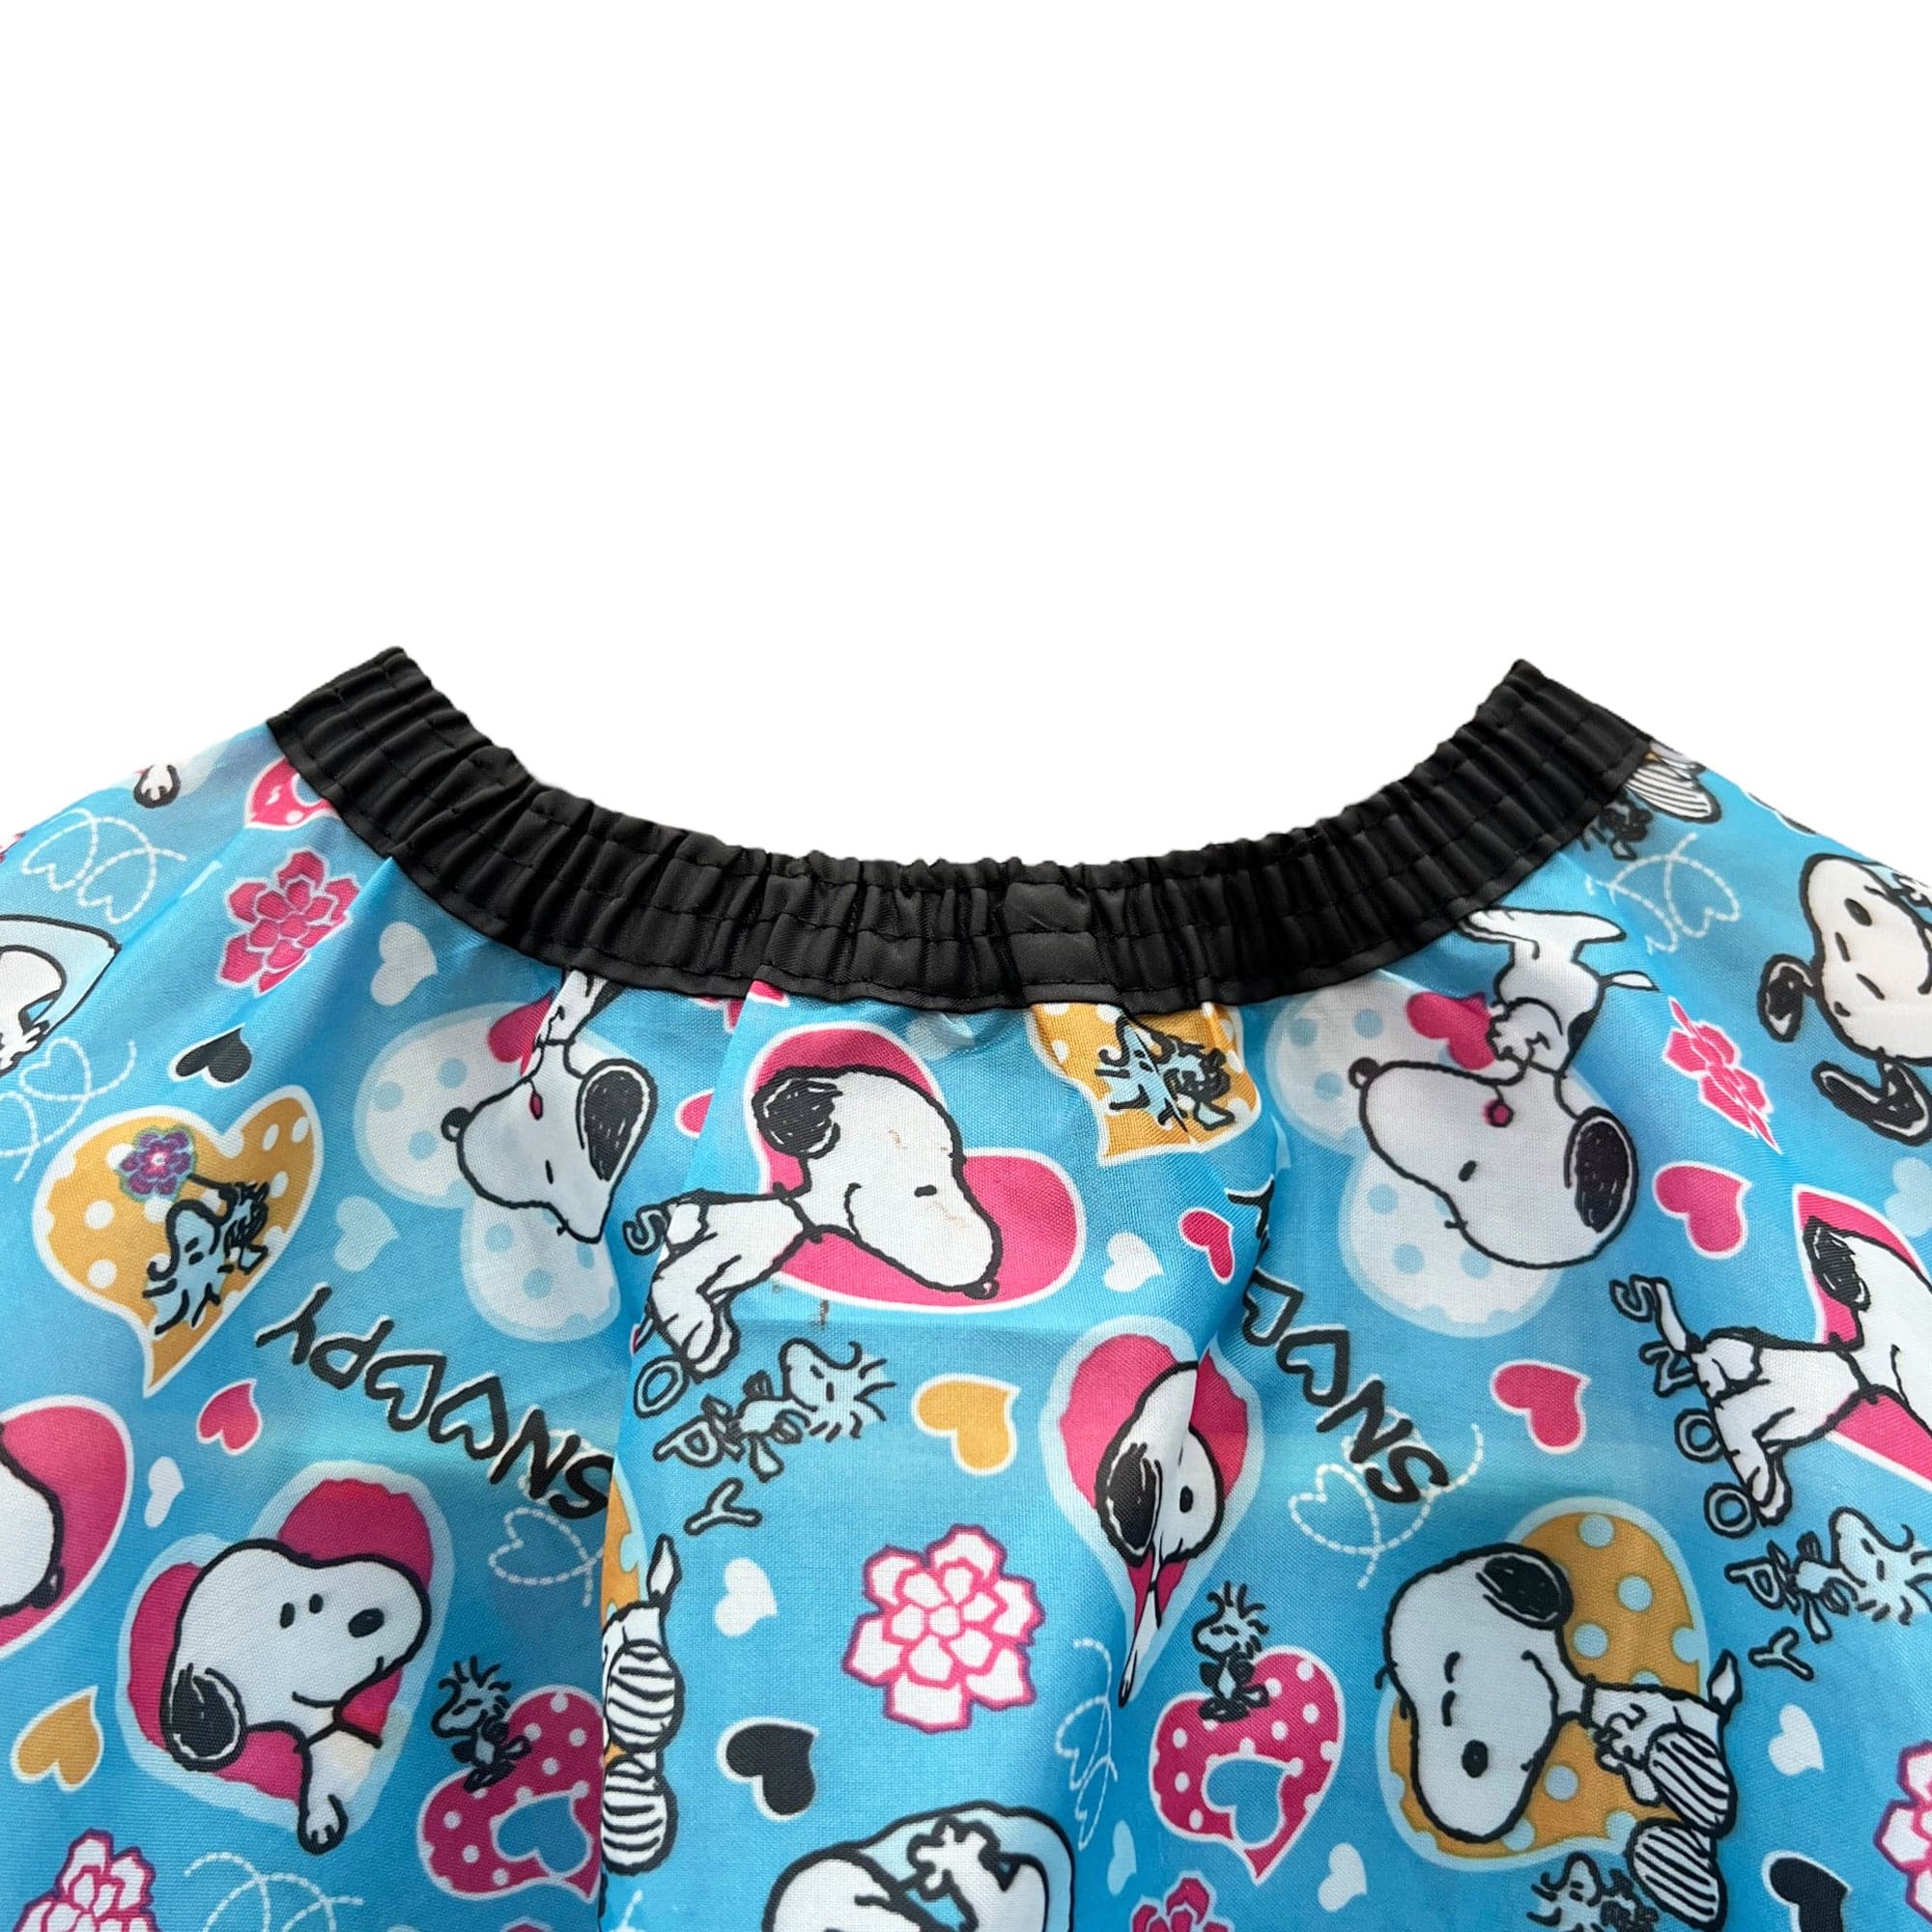 Gabri - Barber Hairdressing Kids Hair Cutting Cape & Gown Snoopy Pattern